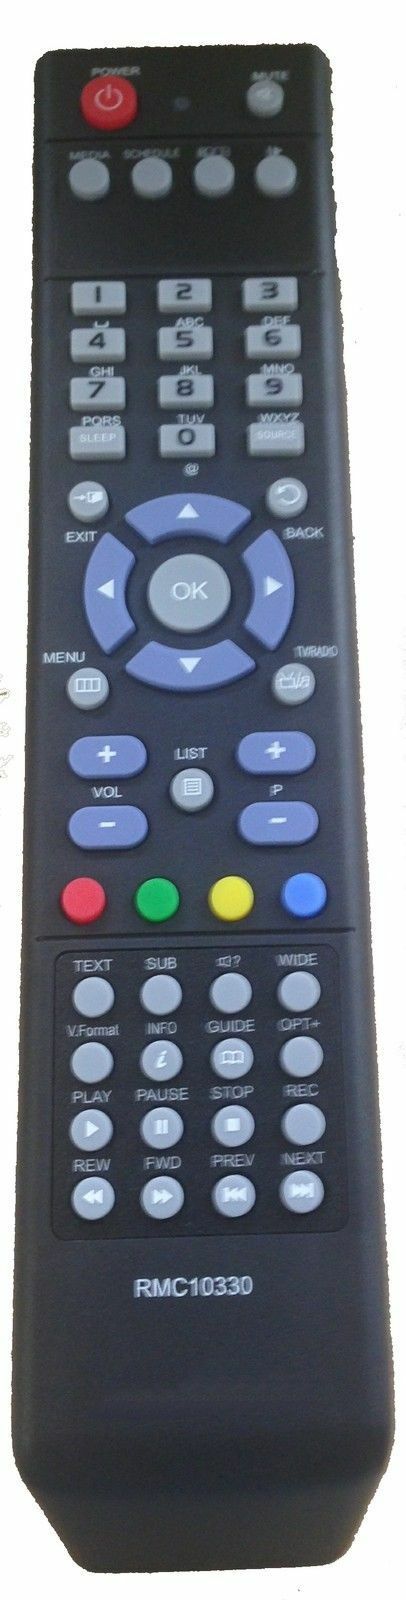 Replacement Remote Control for Skytec Jobi